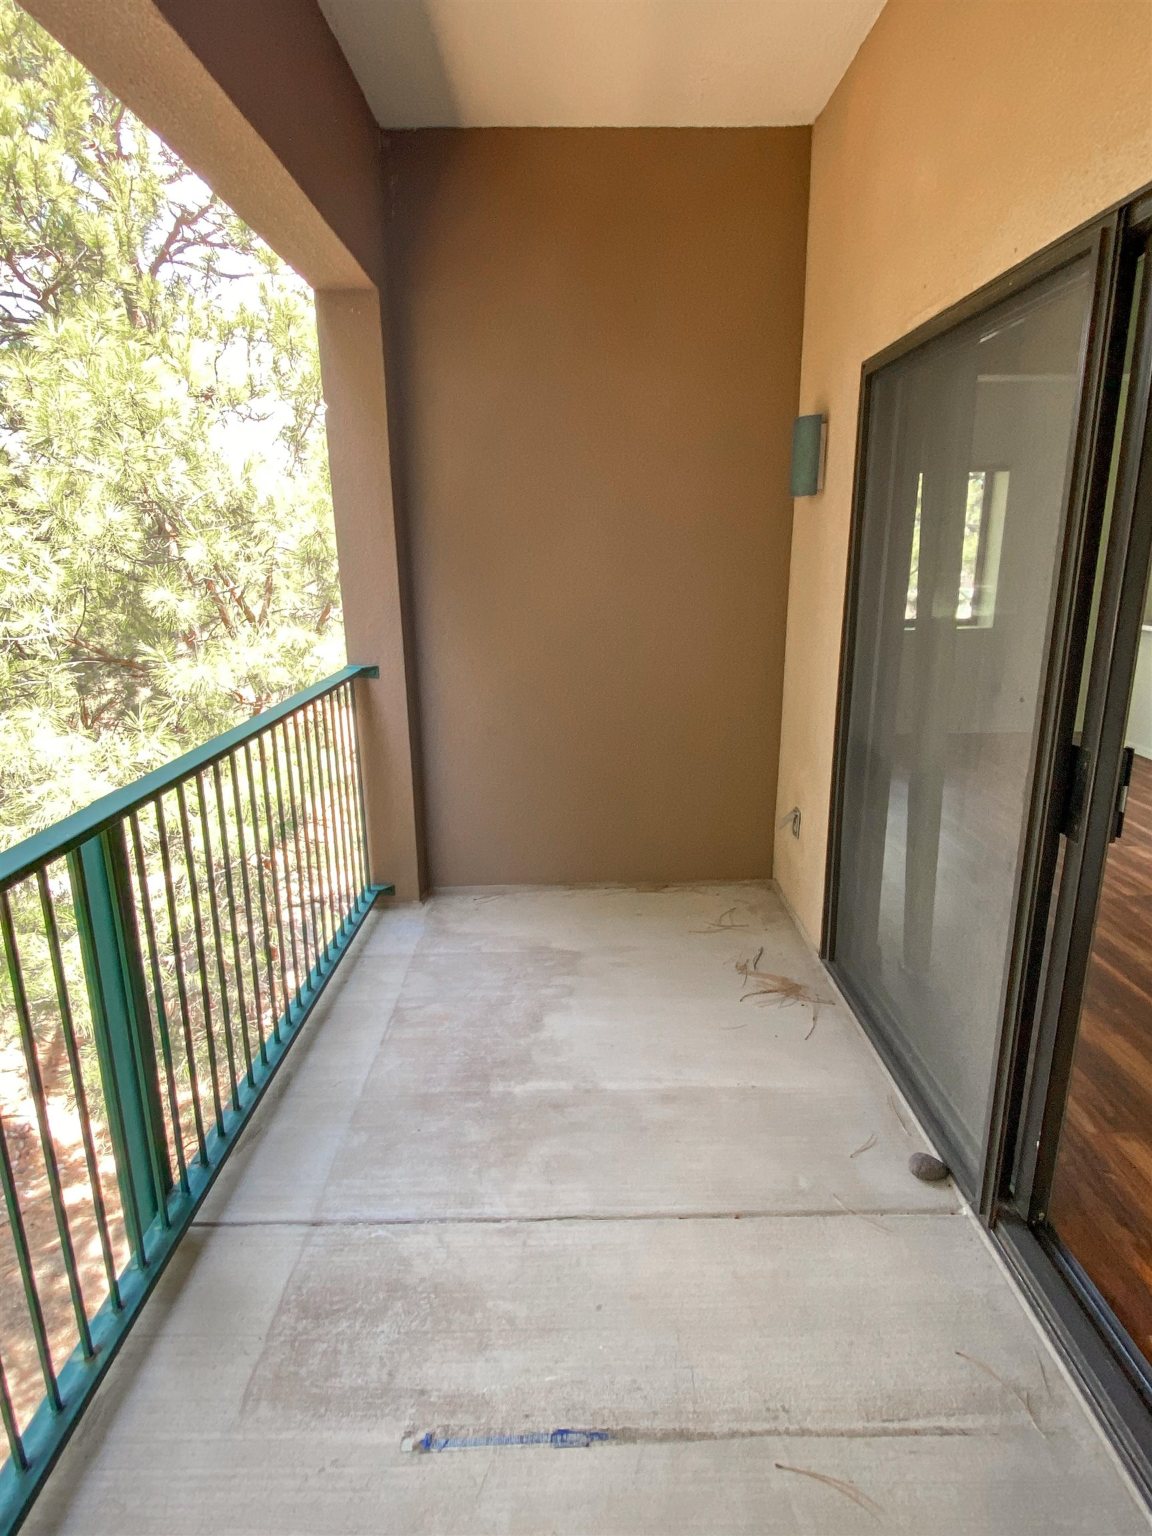 1001 Oppenheimer 220, Los Alamos, New Mexico 87544, 2 Bedrooms Bedrooms, ,2 BathroomsBathrooms,Residential,For Sale,1001 Oppenheimer 220,202201218